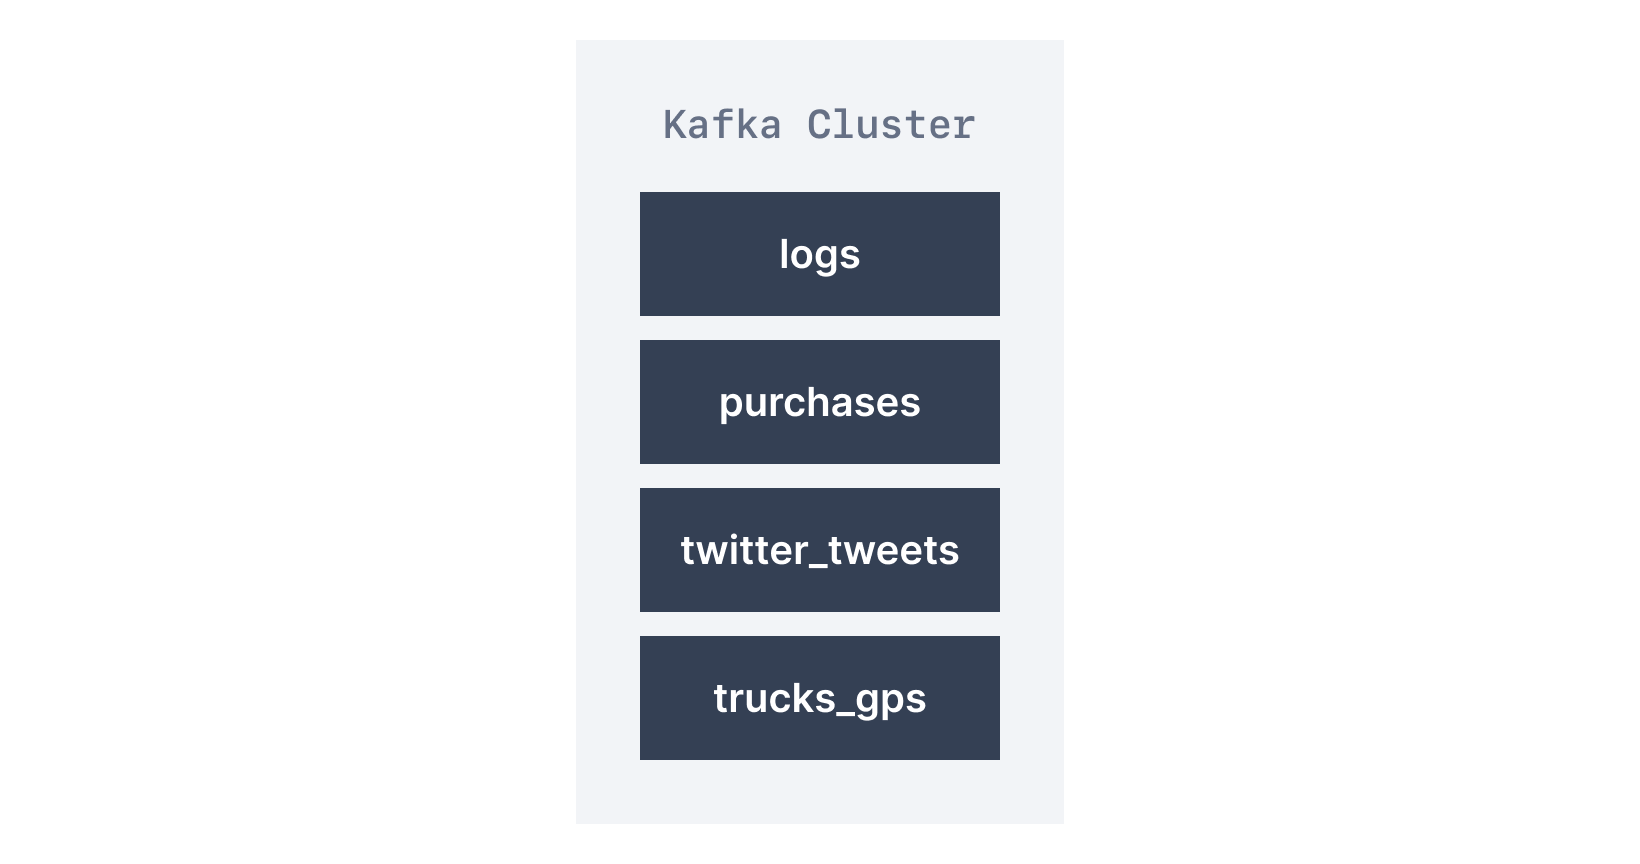 A Kafka Cluster with 4 Topics shown in a diagram